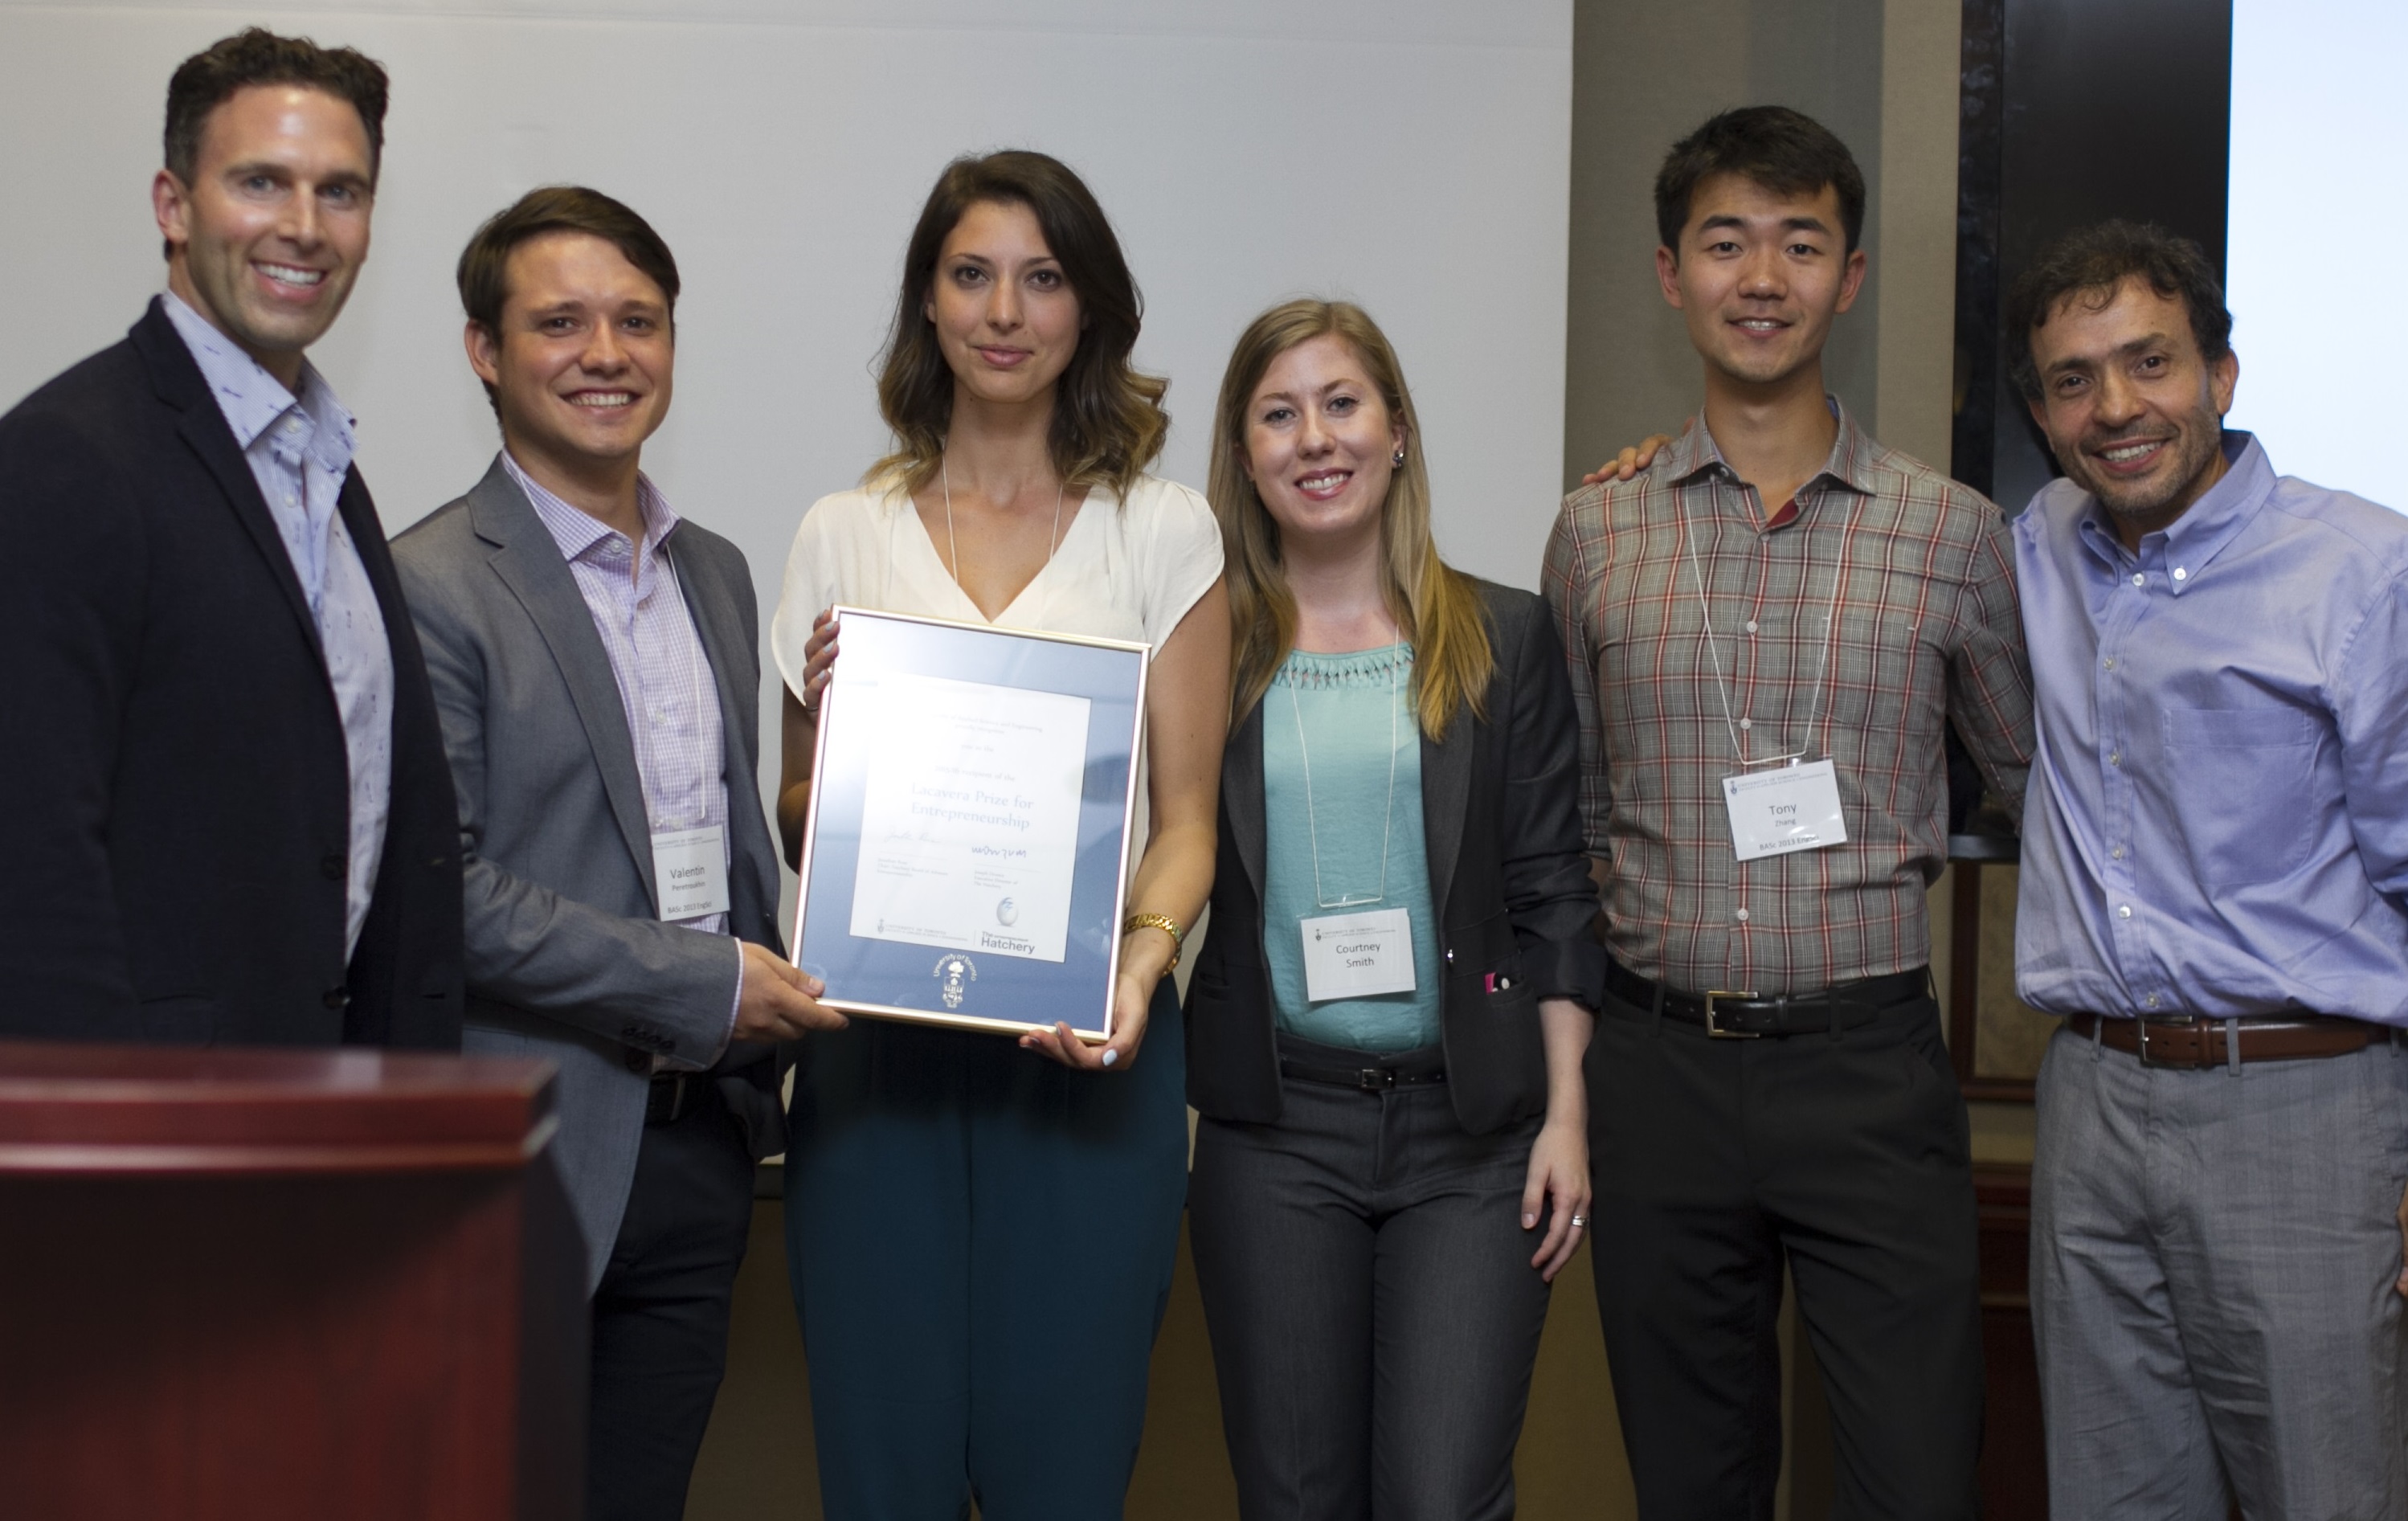 The Pillsy team receives the Orozco Prize from The Entrepreneurship Hatchery.